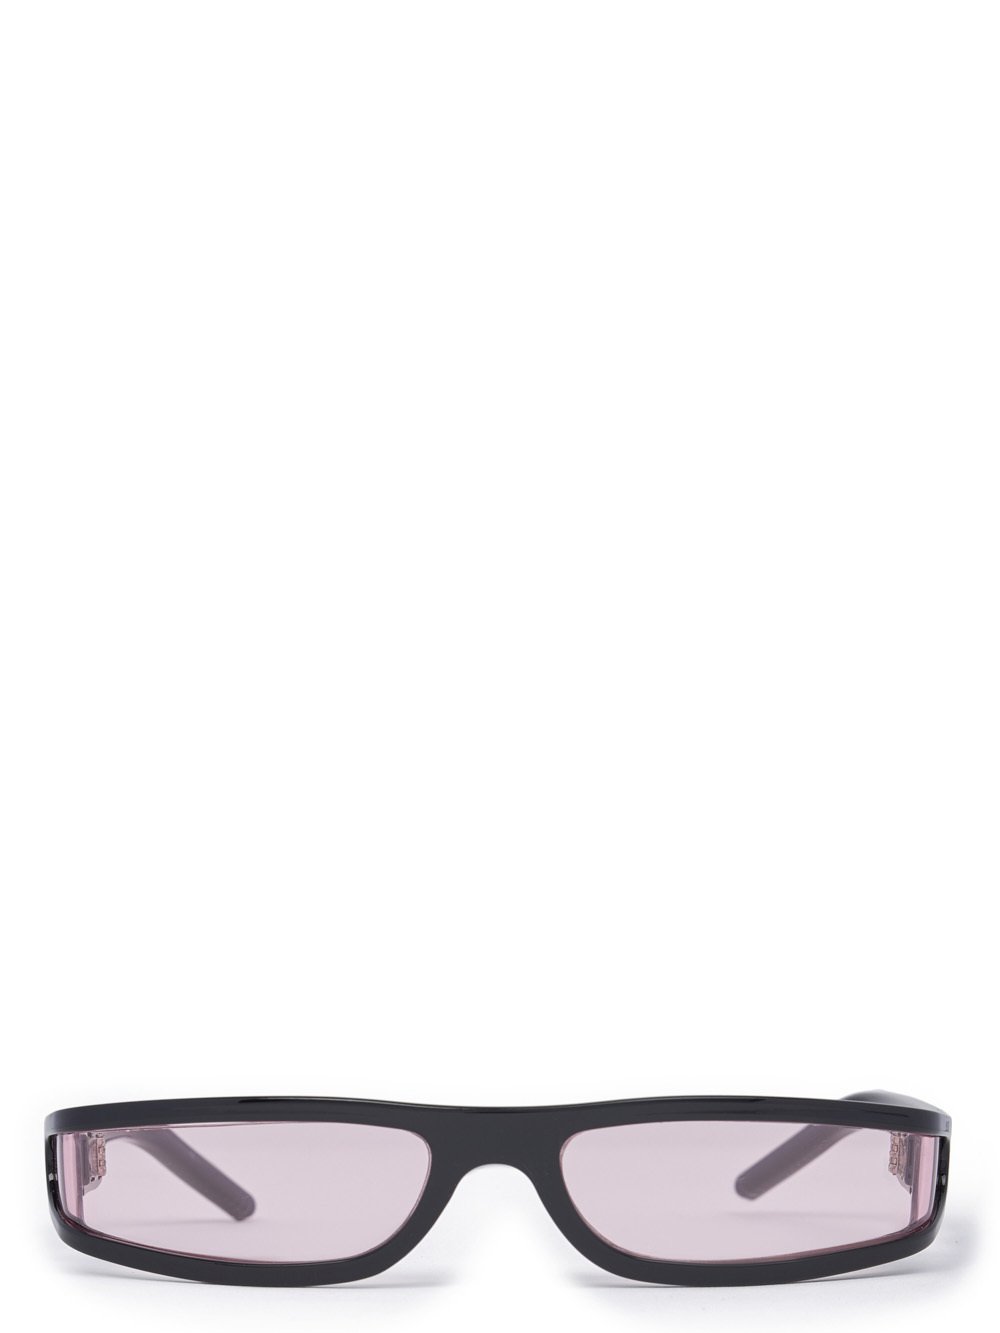 RICK OWENS FOG SUNGLASSES IN BLACK WITH PINK LENS